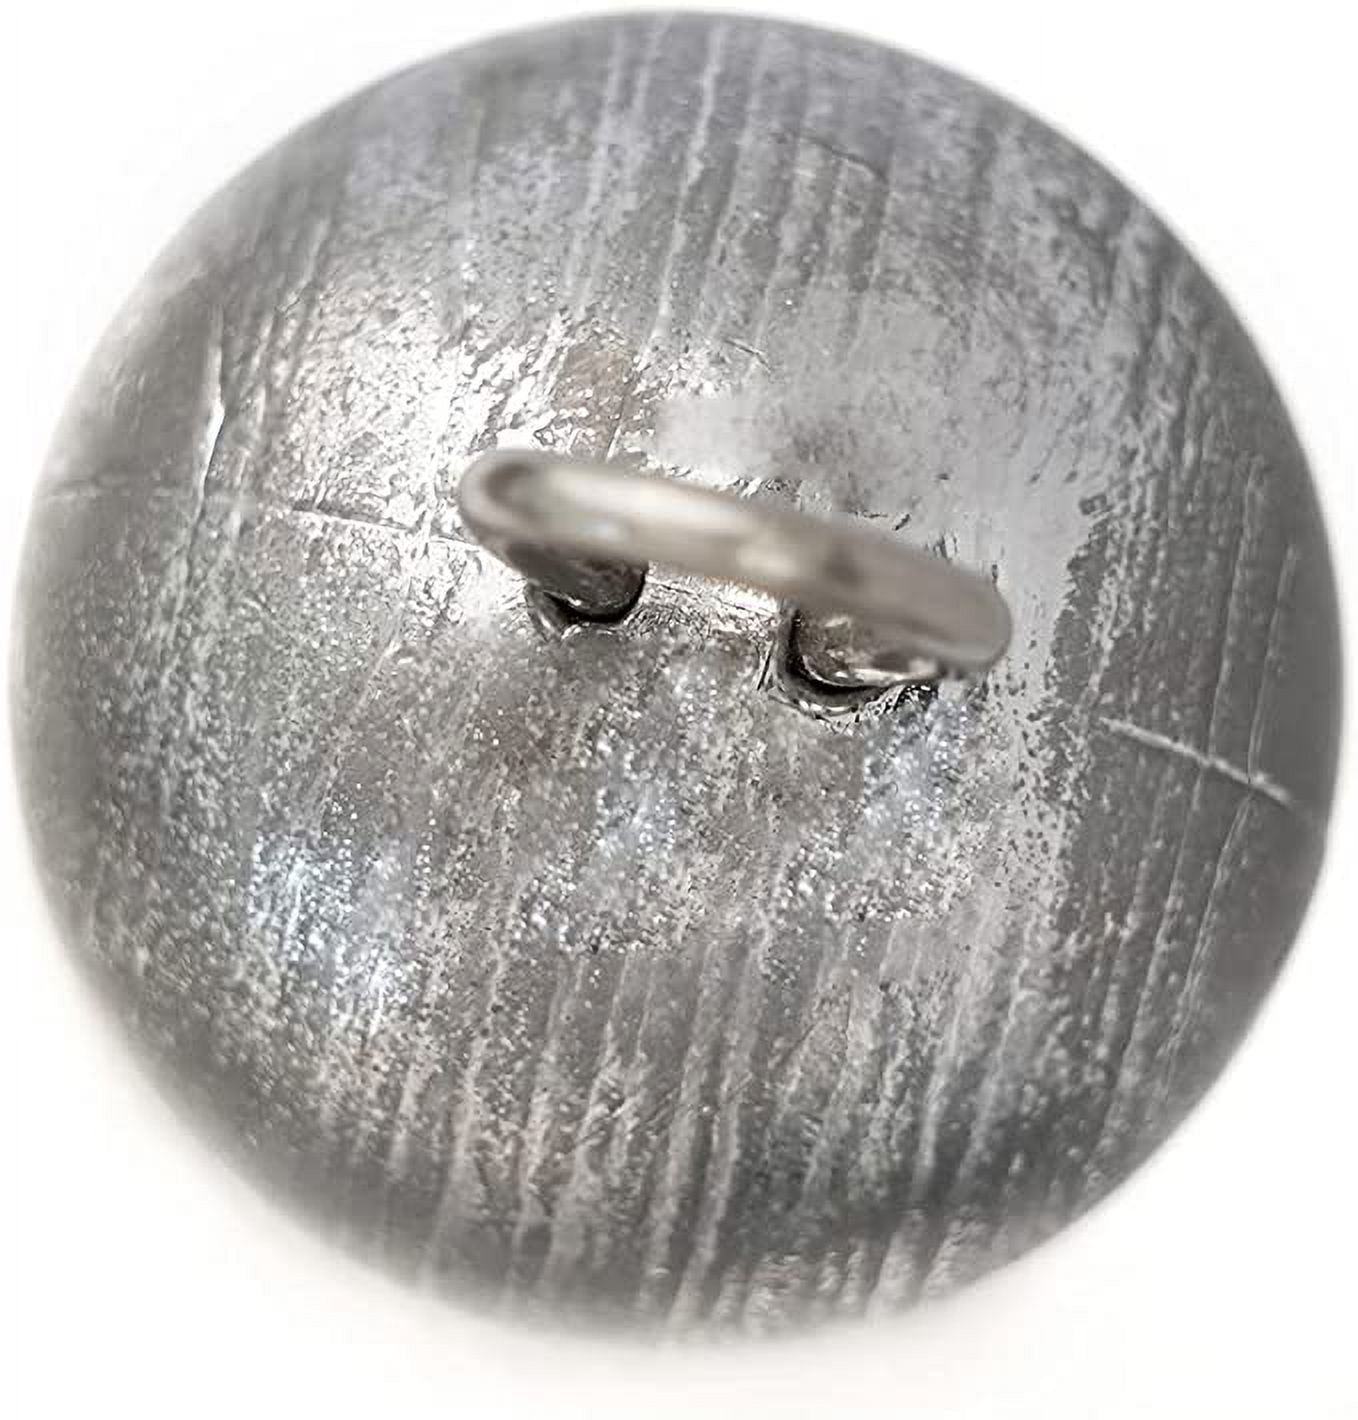 Deep Drop Fishing Lead Weight Sinker, 2lb-5lb Available, Fits in Rodholder,  Made in The USA